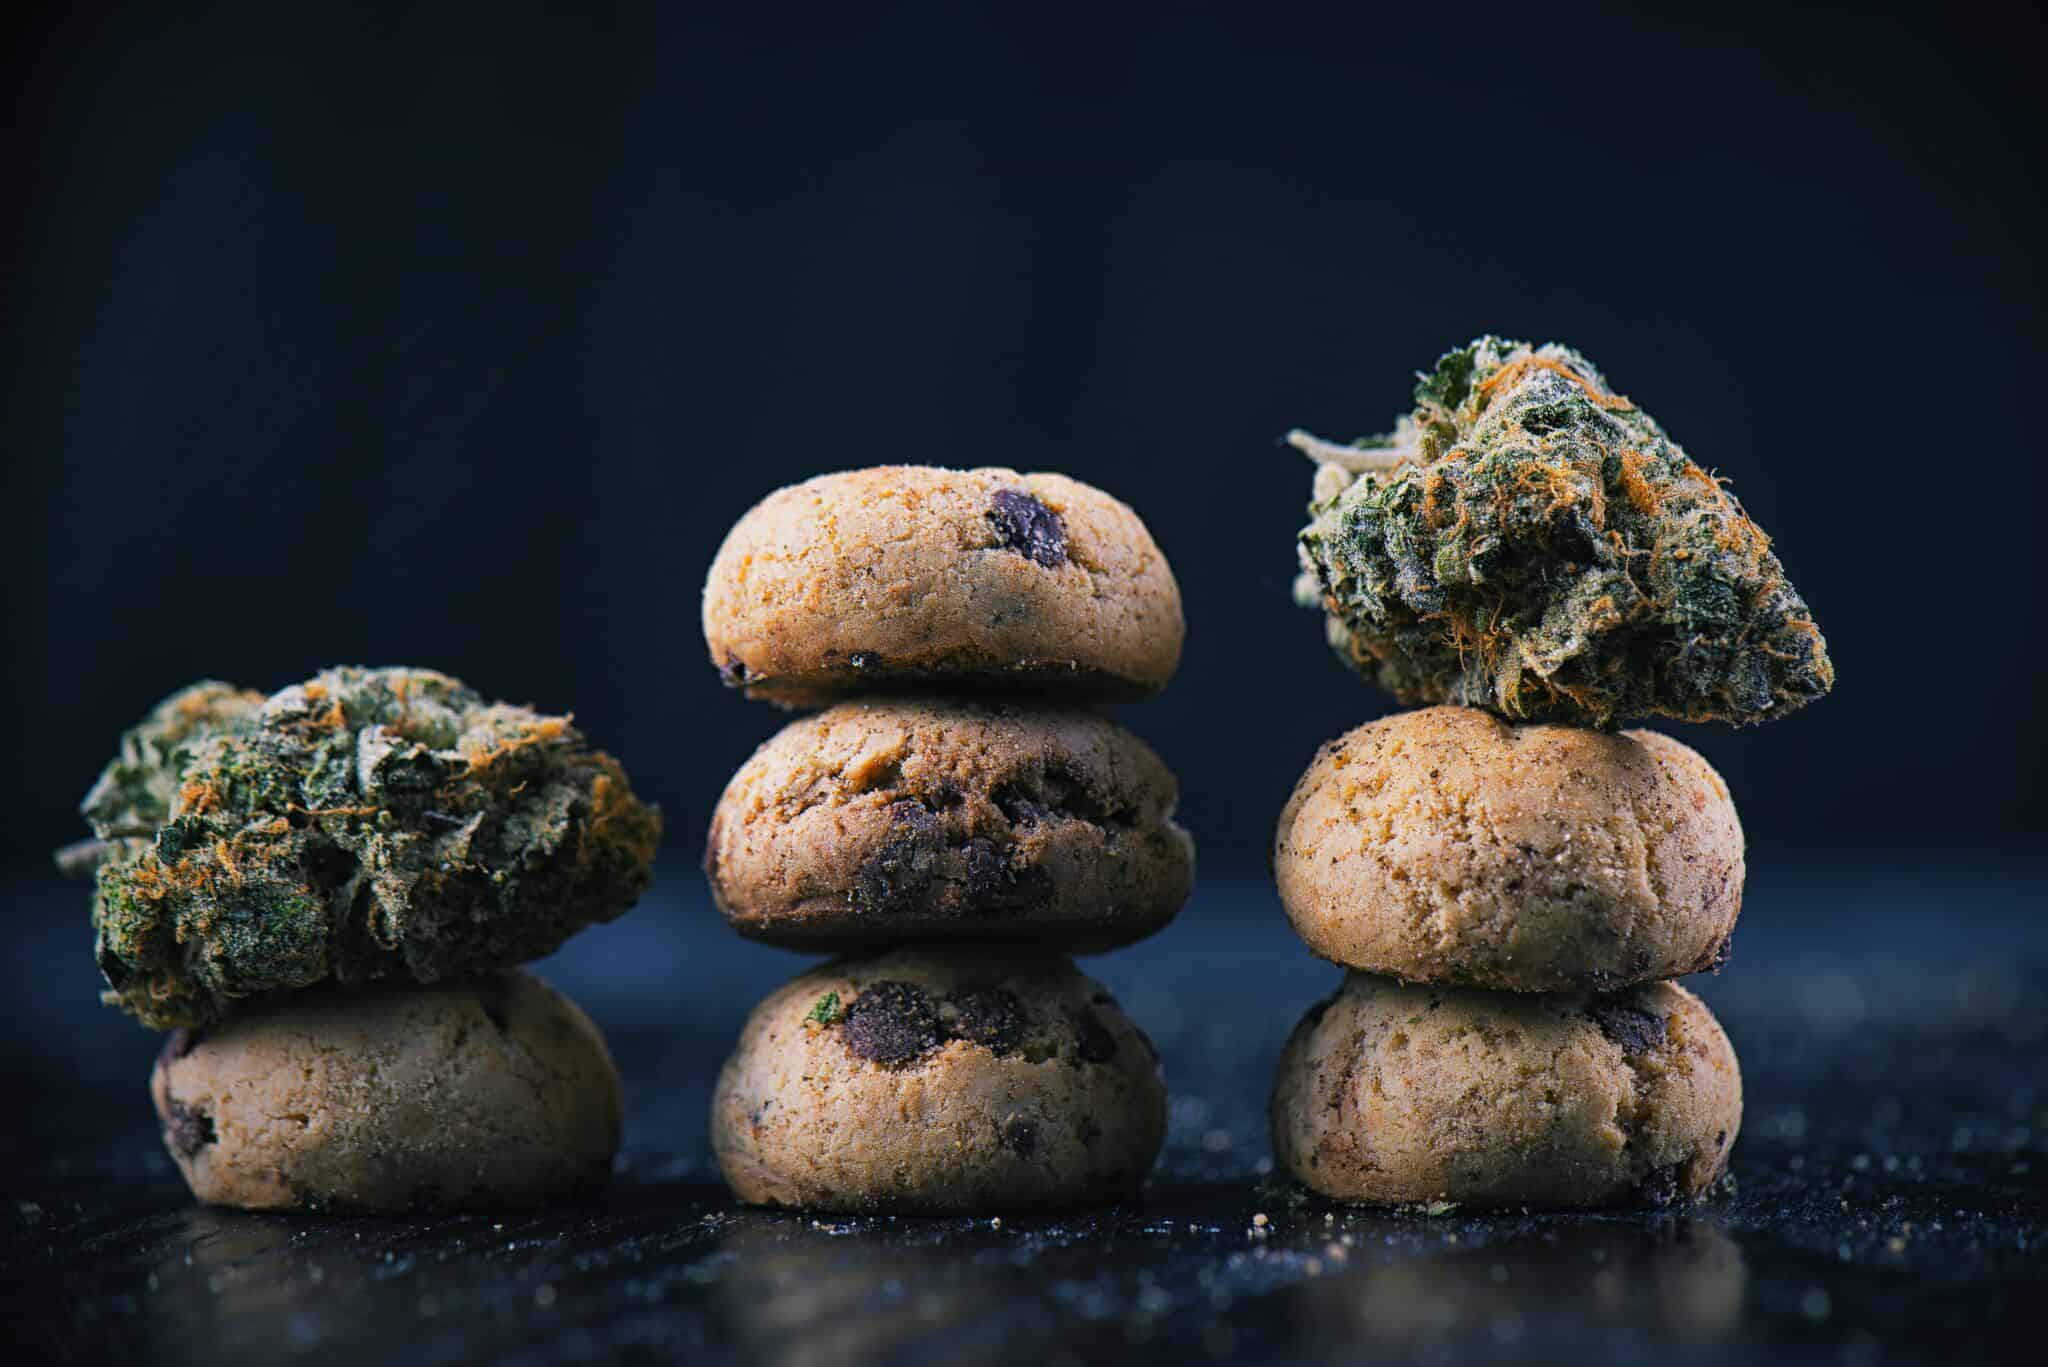 neon-joint-beginners-guide-to-eating-edibles